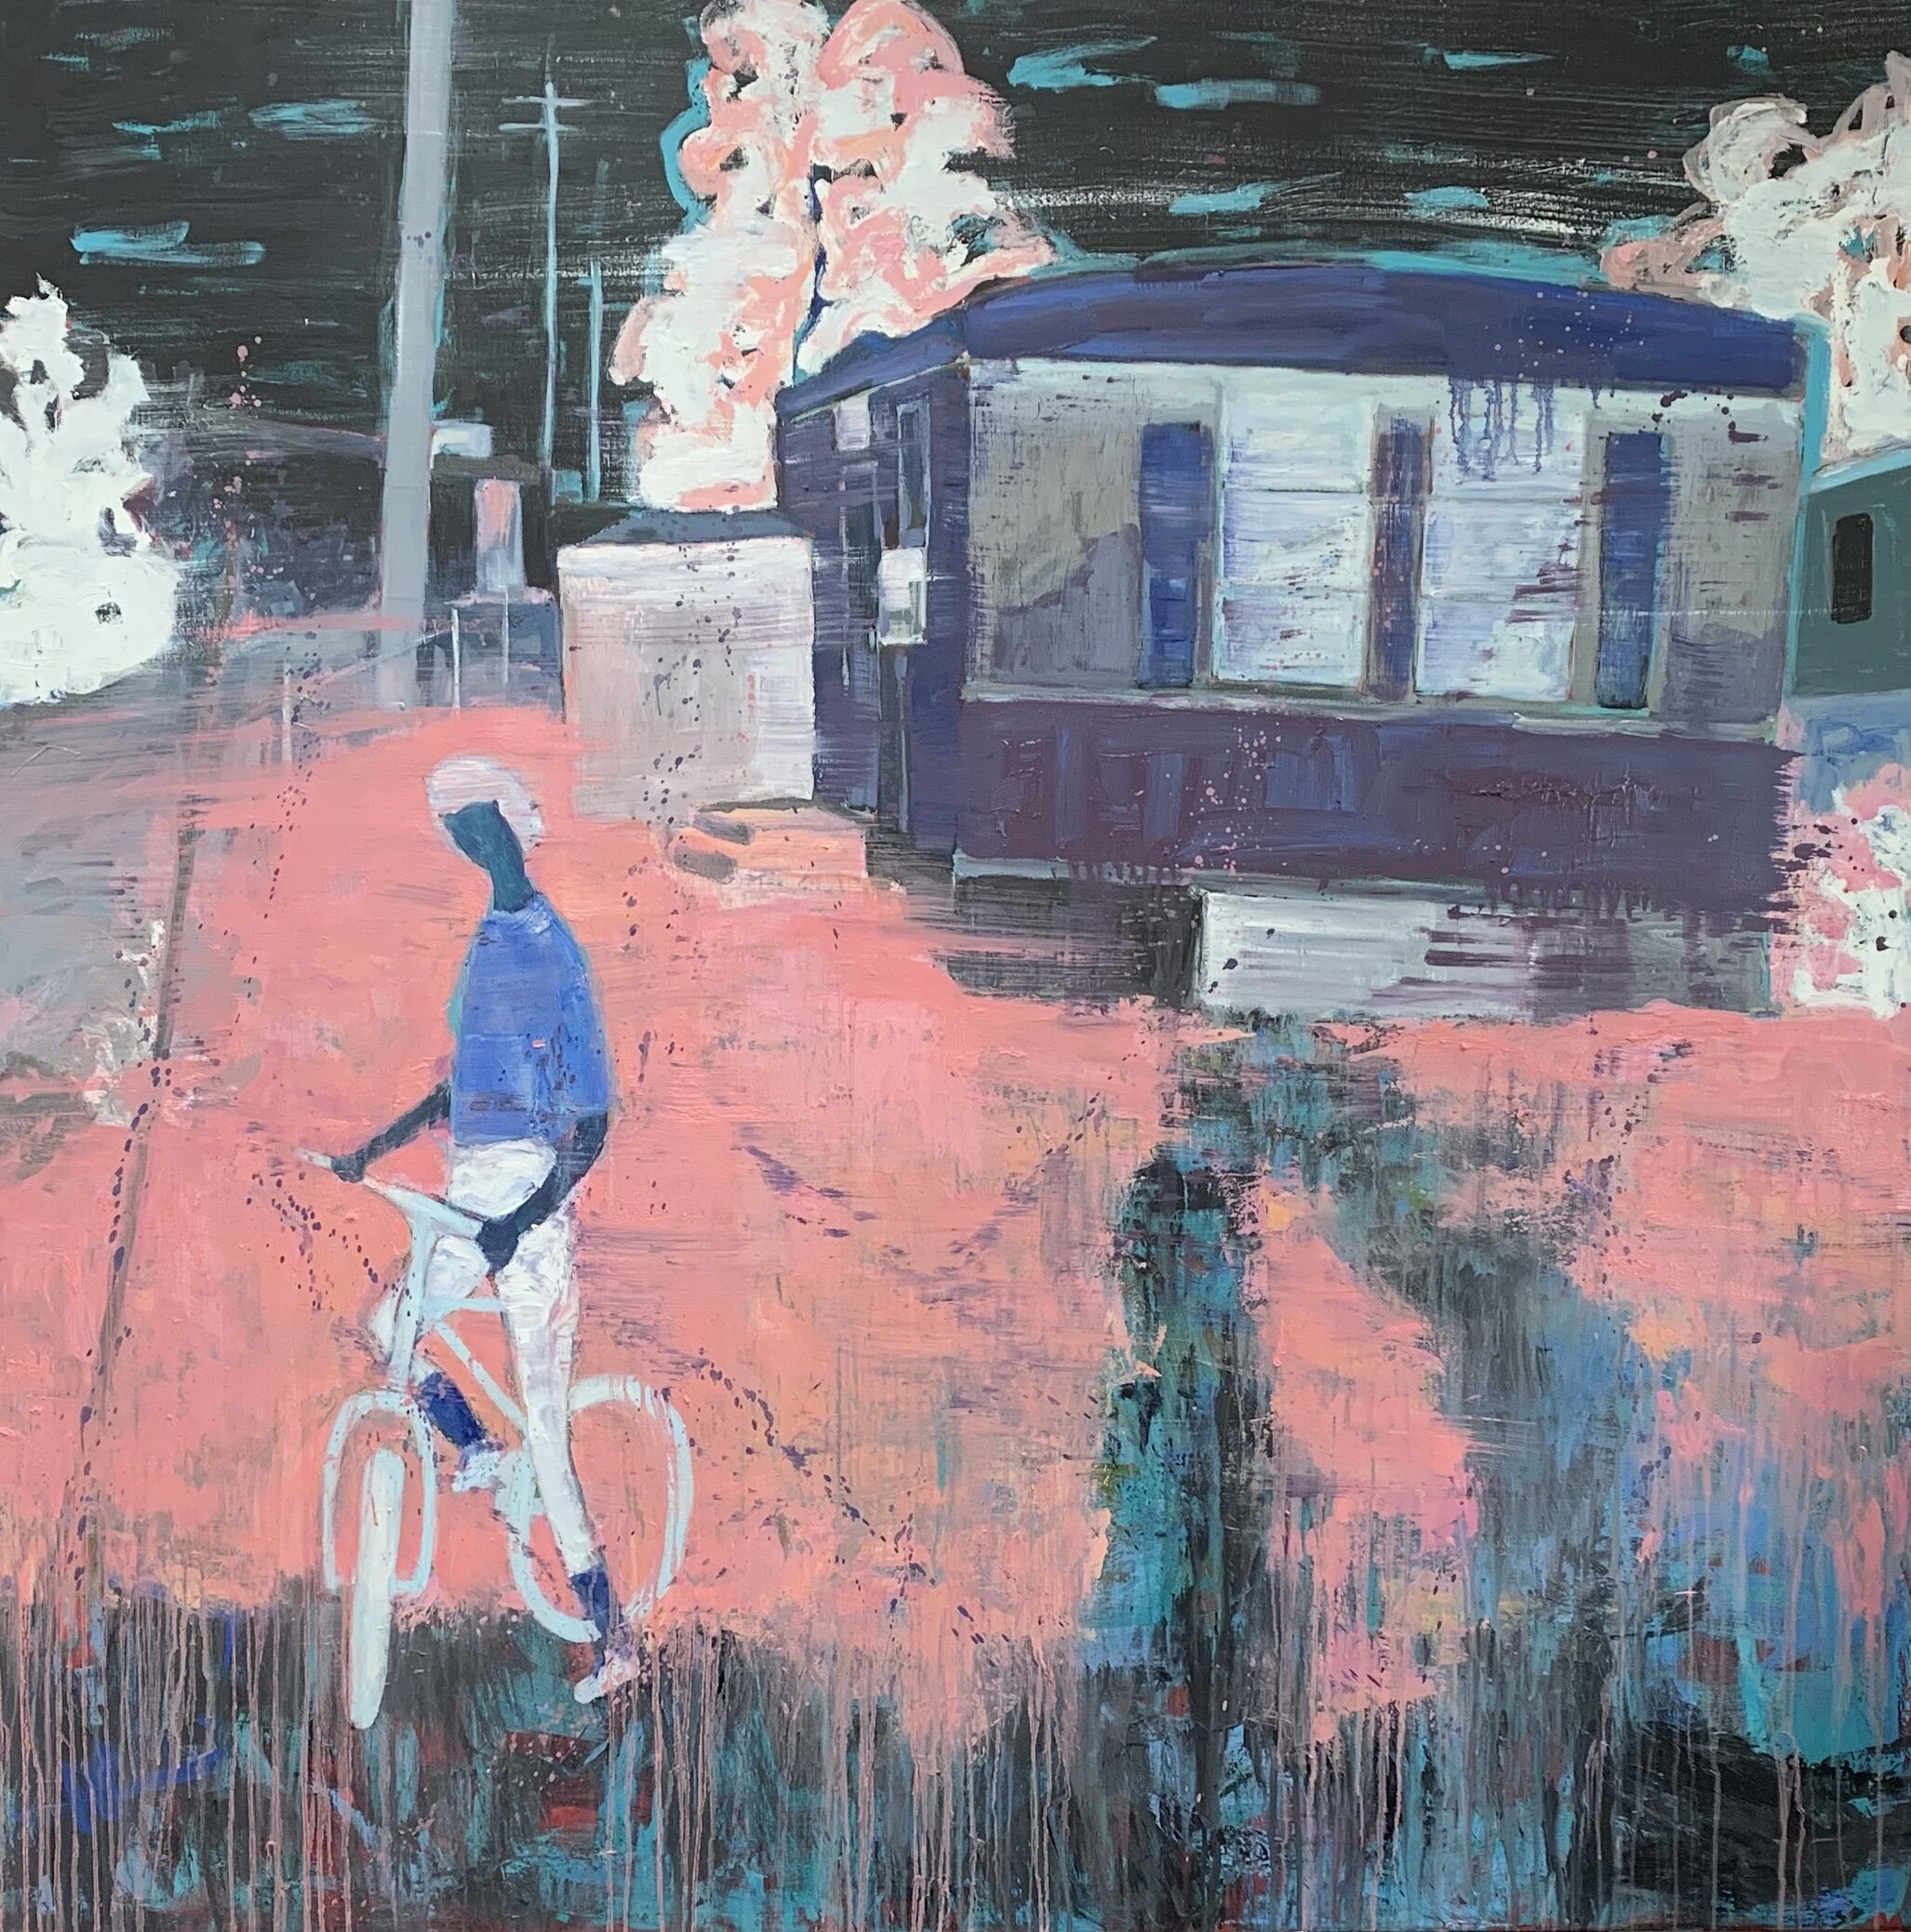    Girl and Bike    Oil and acrylic on canvas 60 x 60 x 2” 